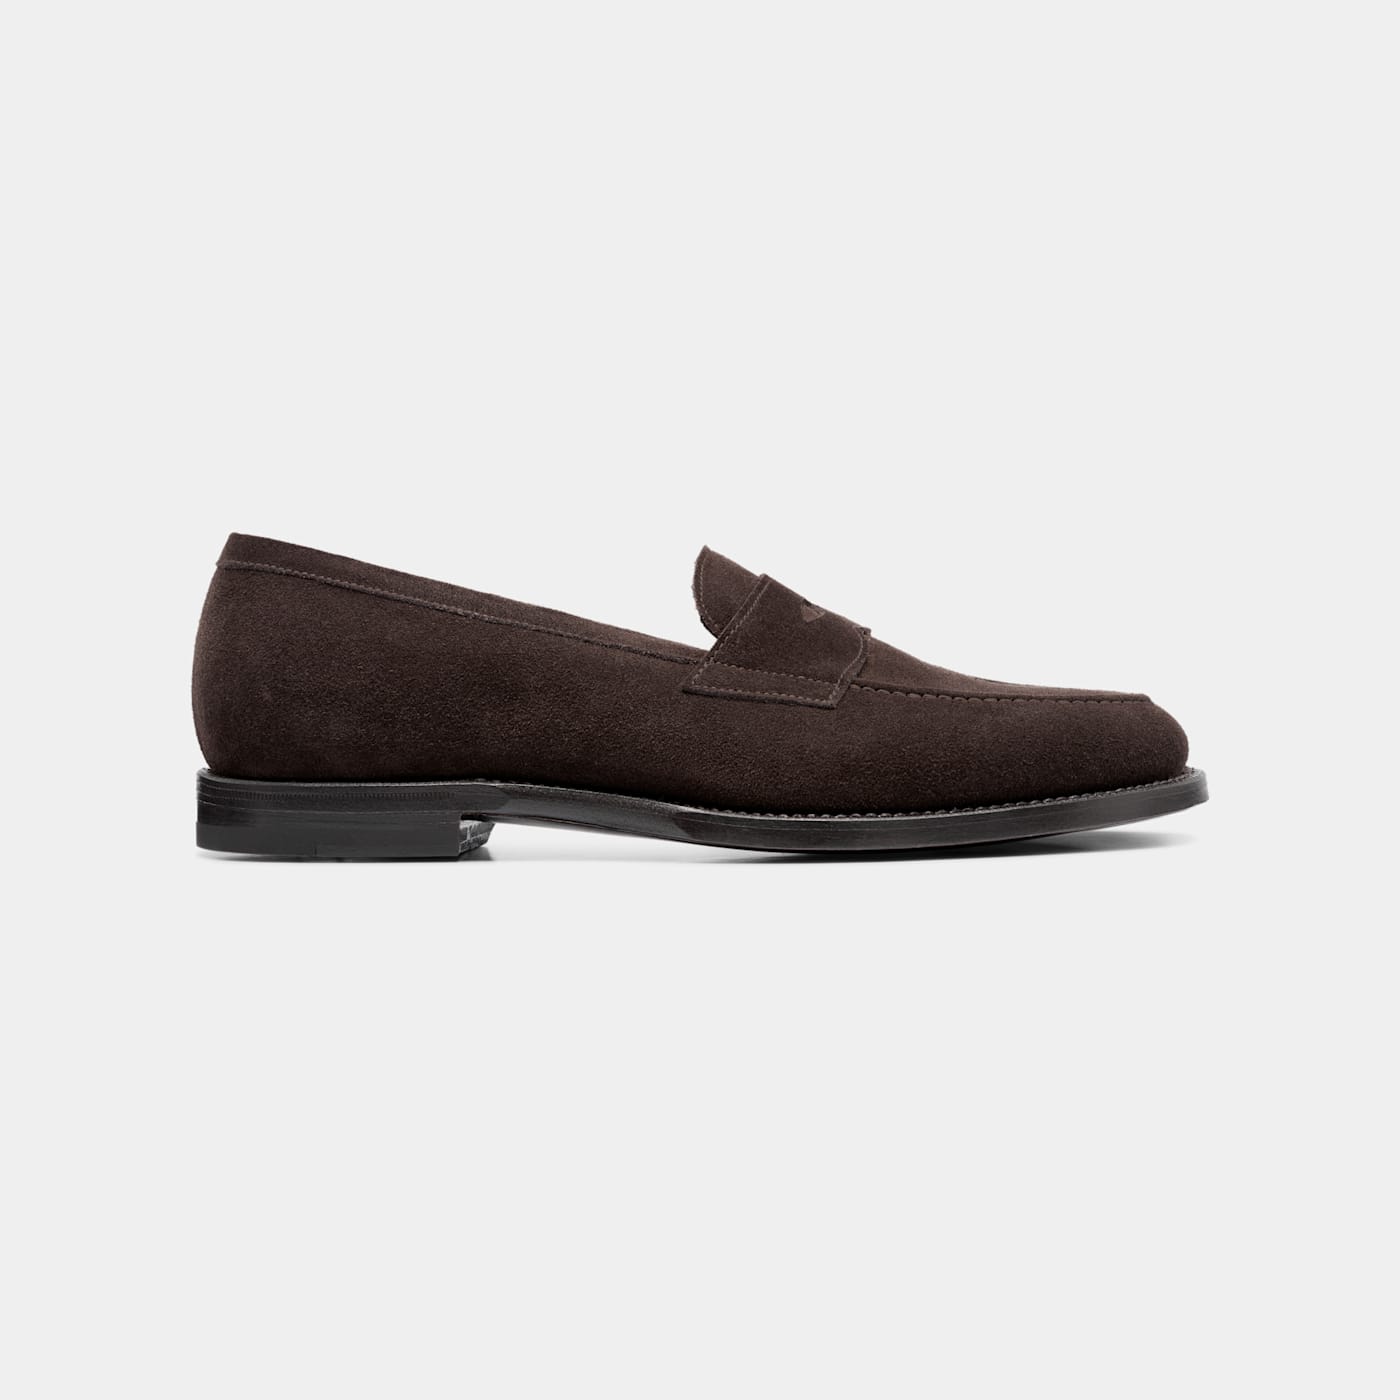 Suitsupply Dark Brown Penny Loafer